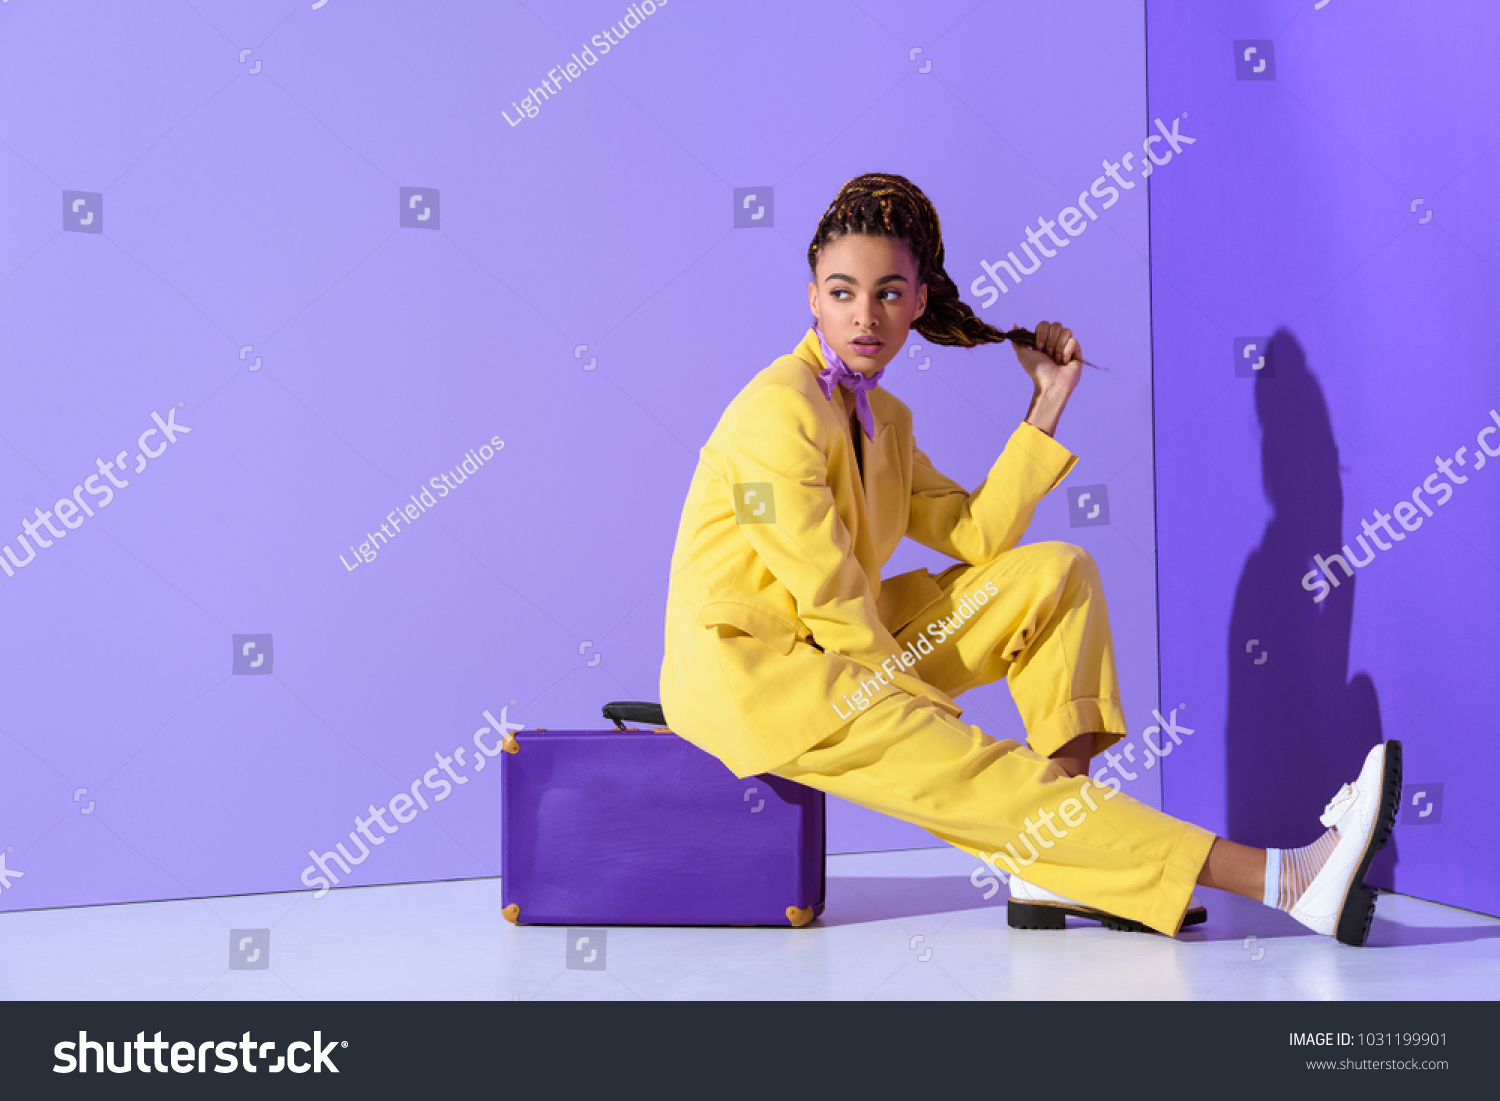 african american girl posing in yellow suit sitting on purple suitcase, on trendy ultra violet background #1031199901